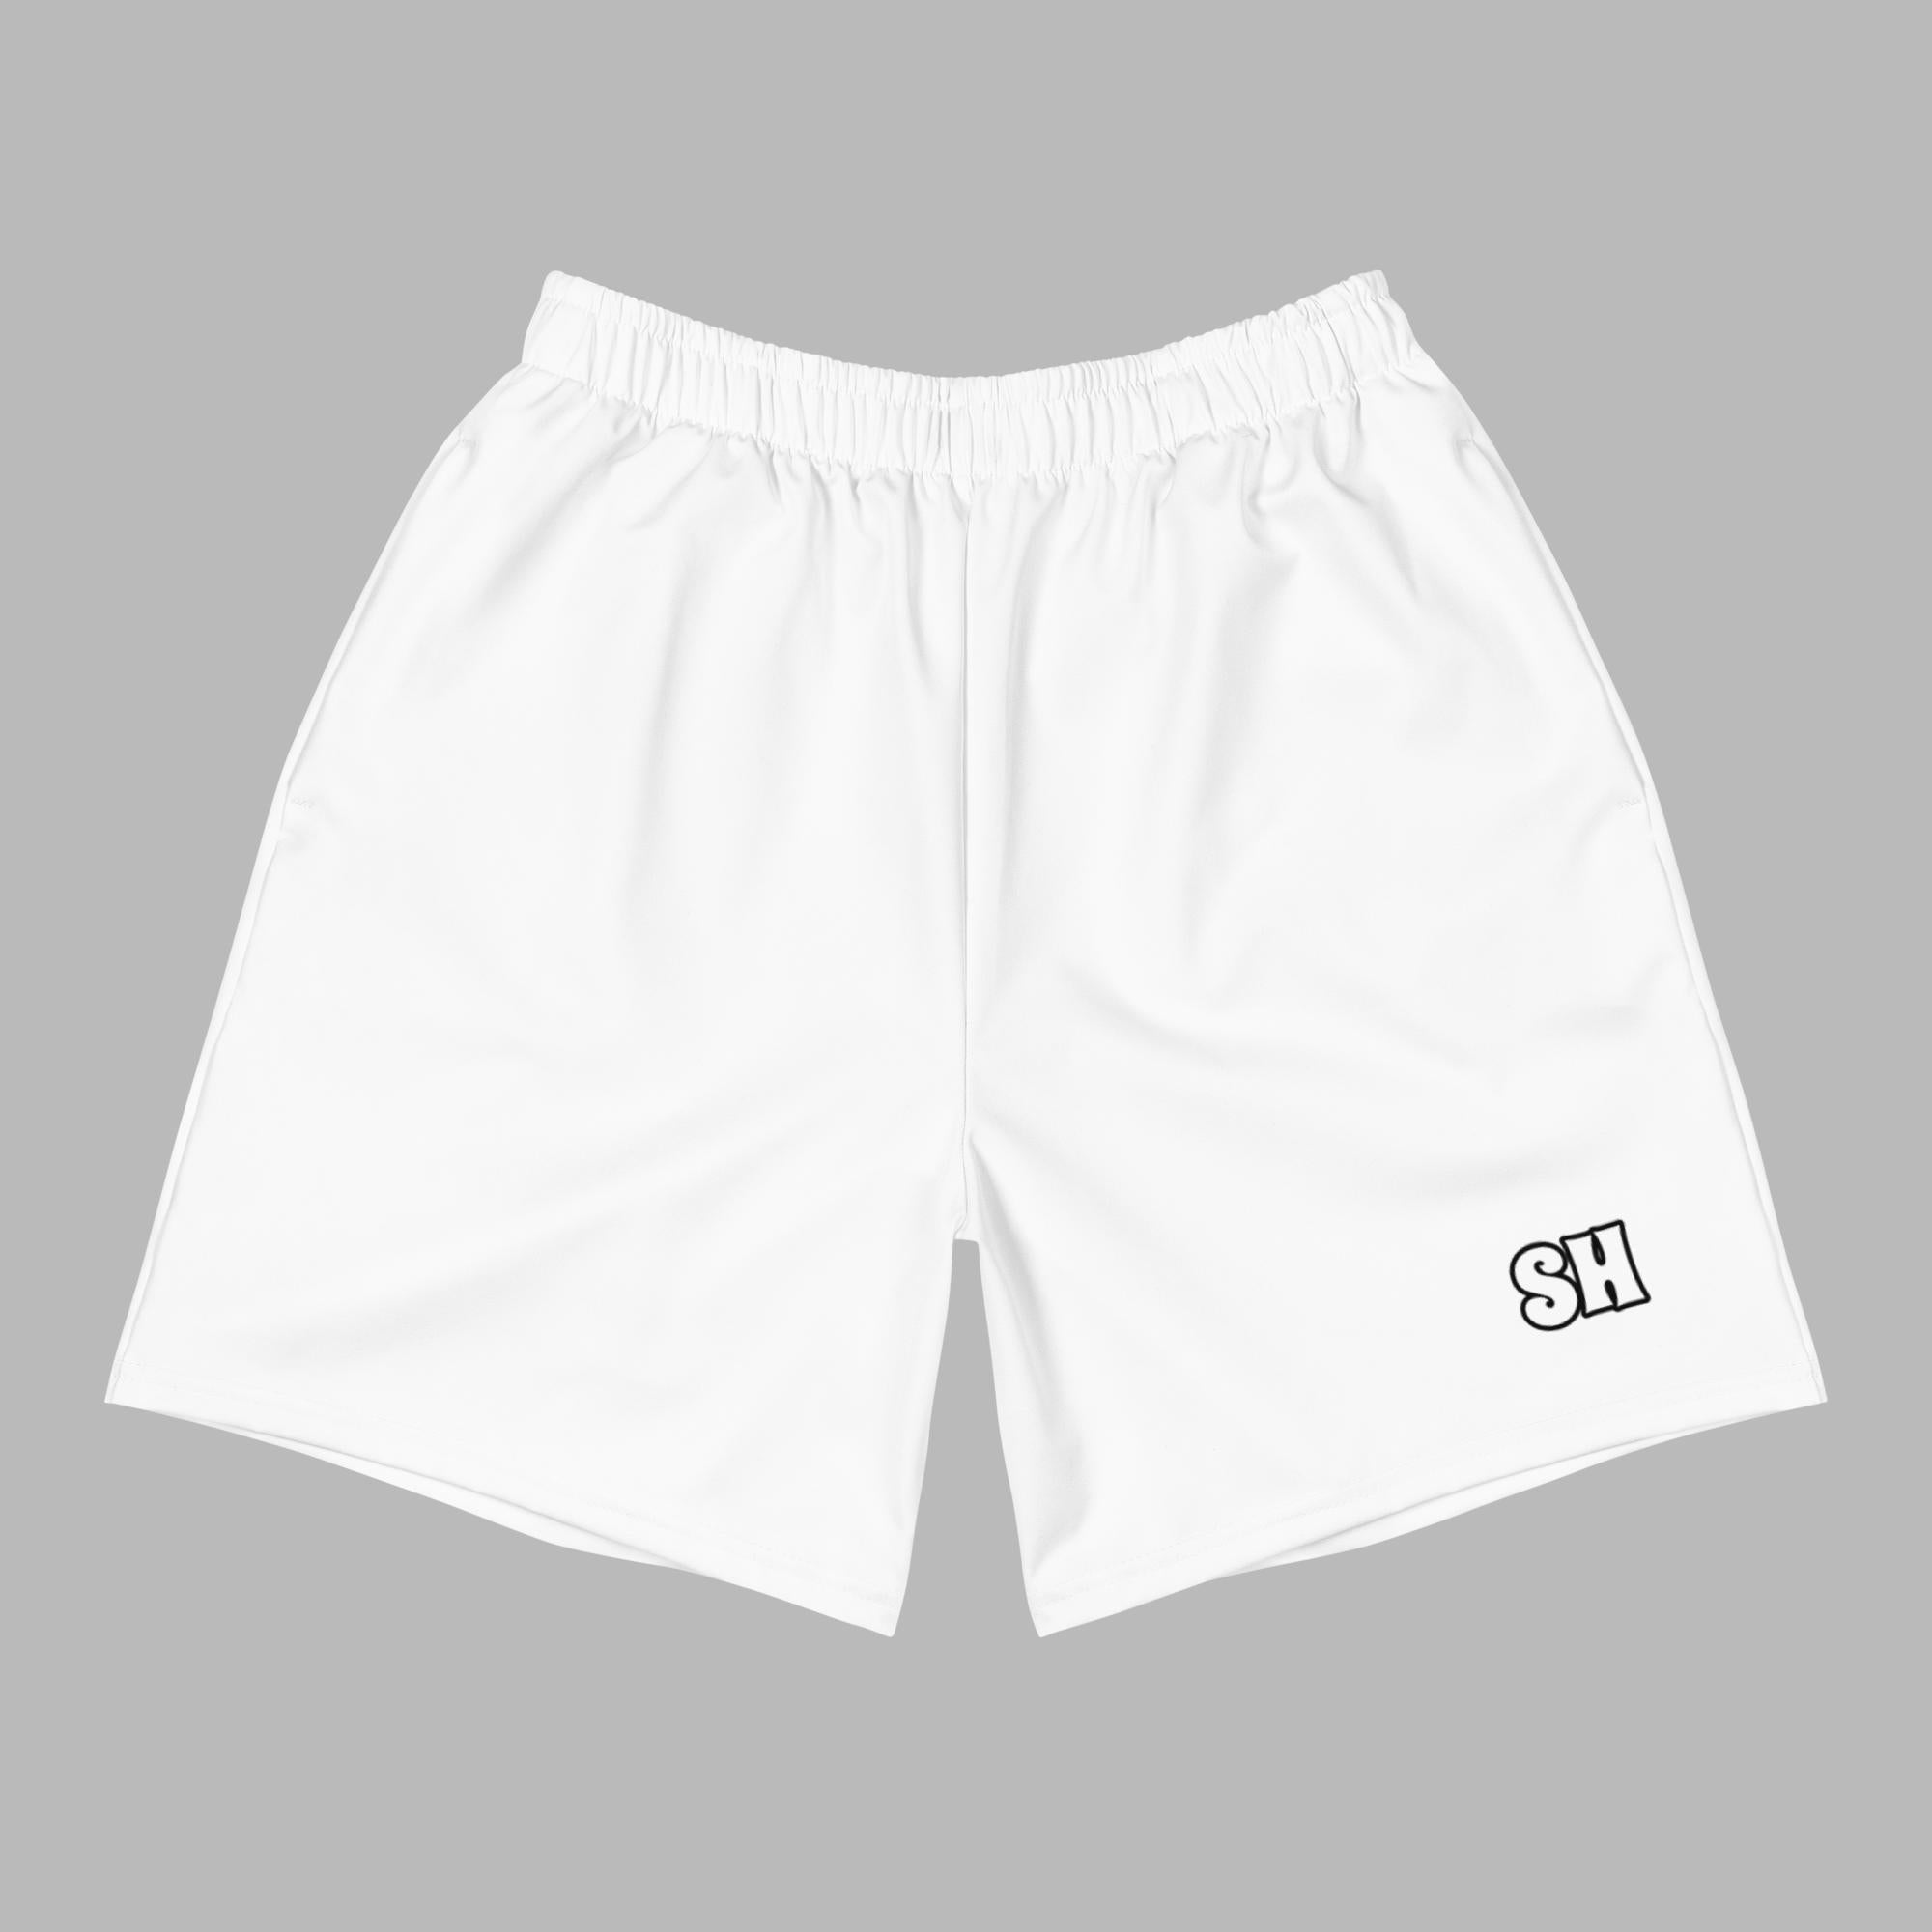 Men's Recycled Athletic Shorts - White